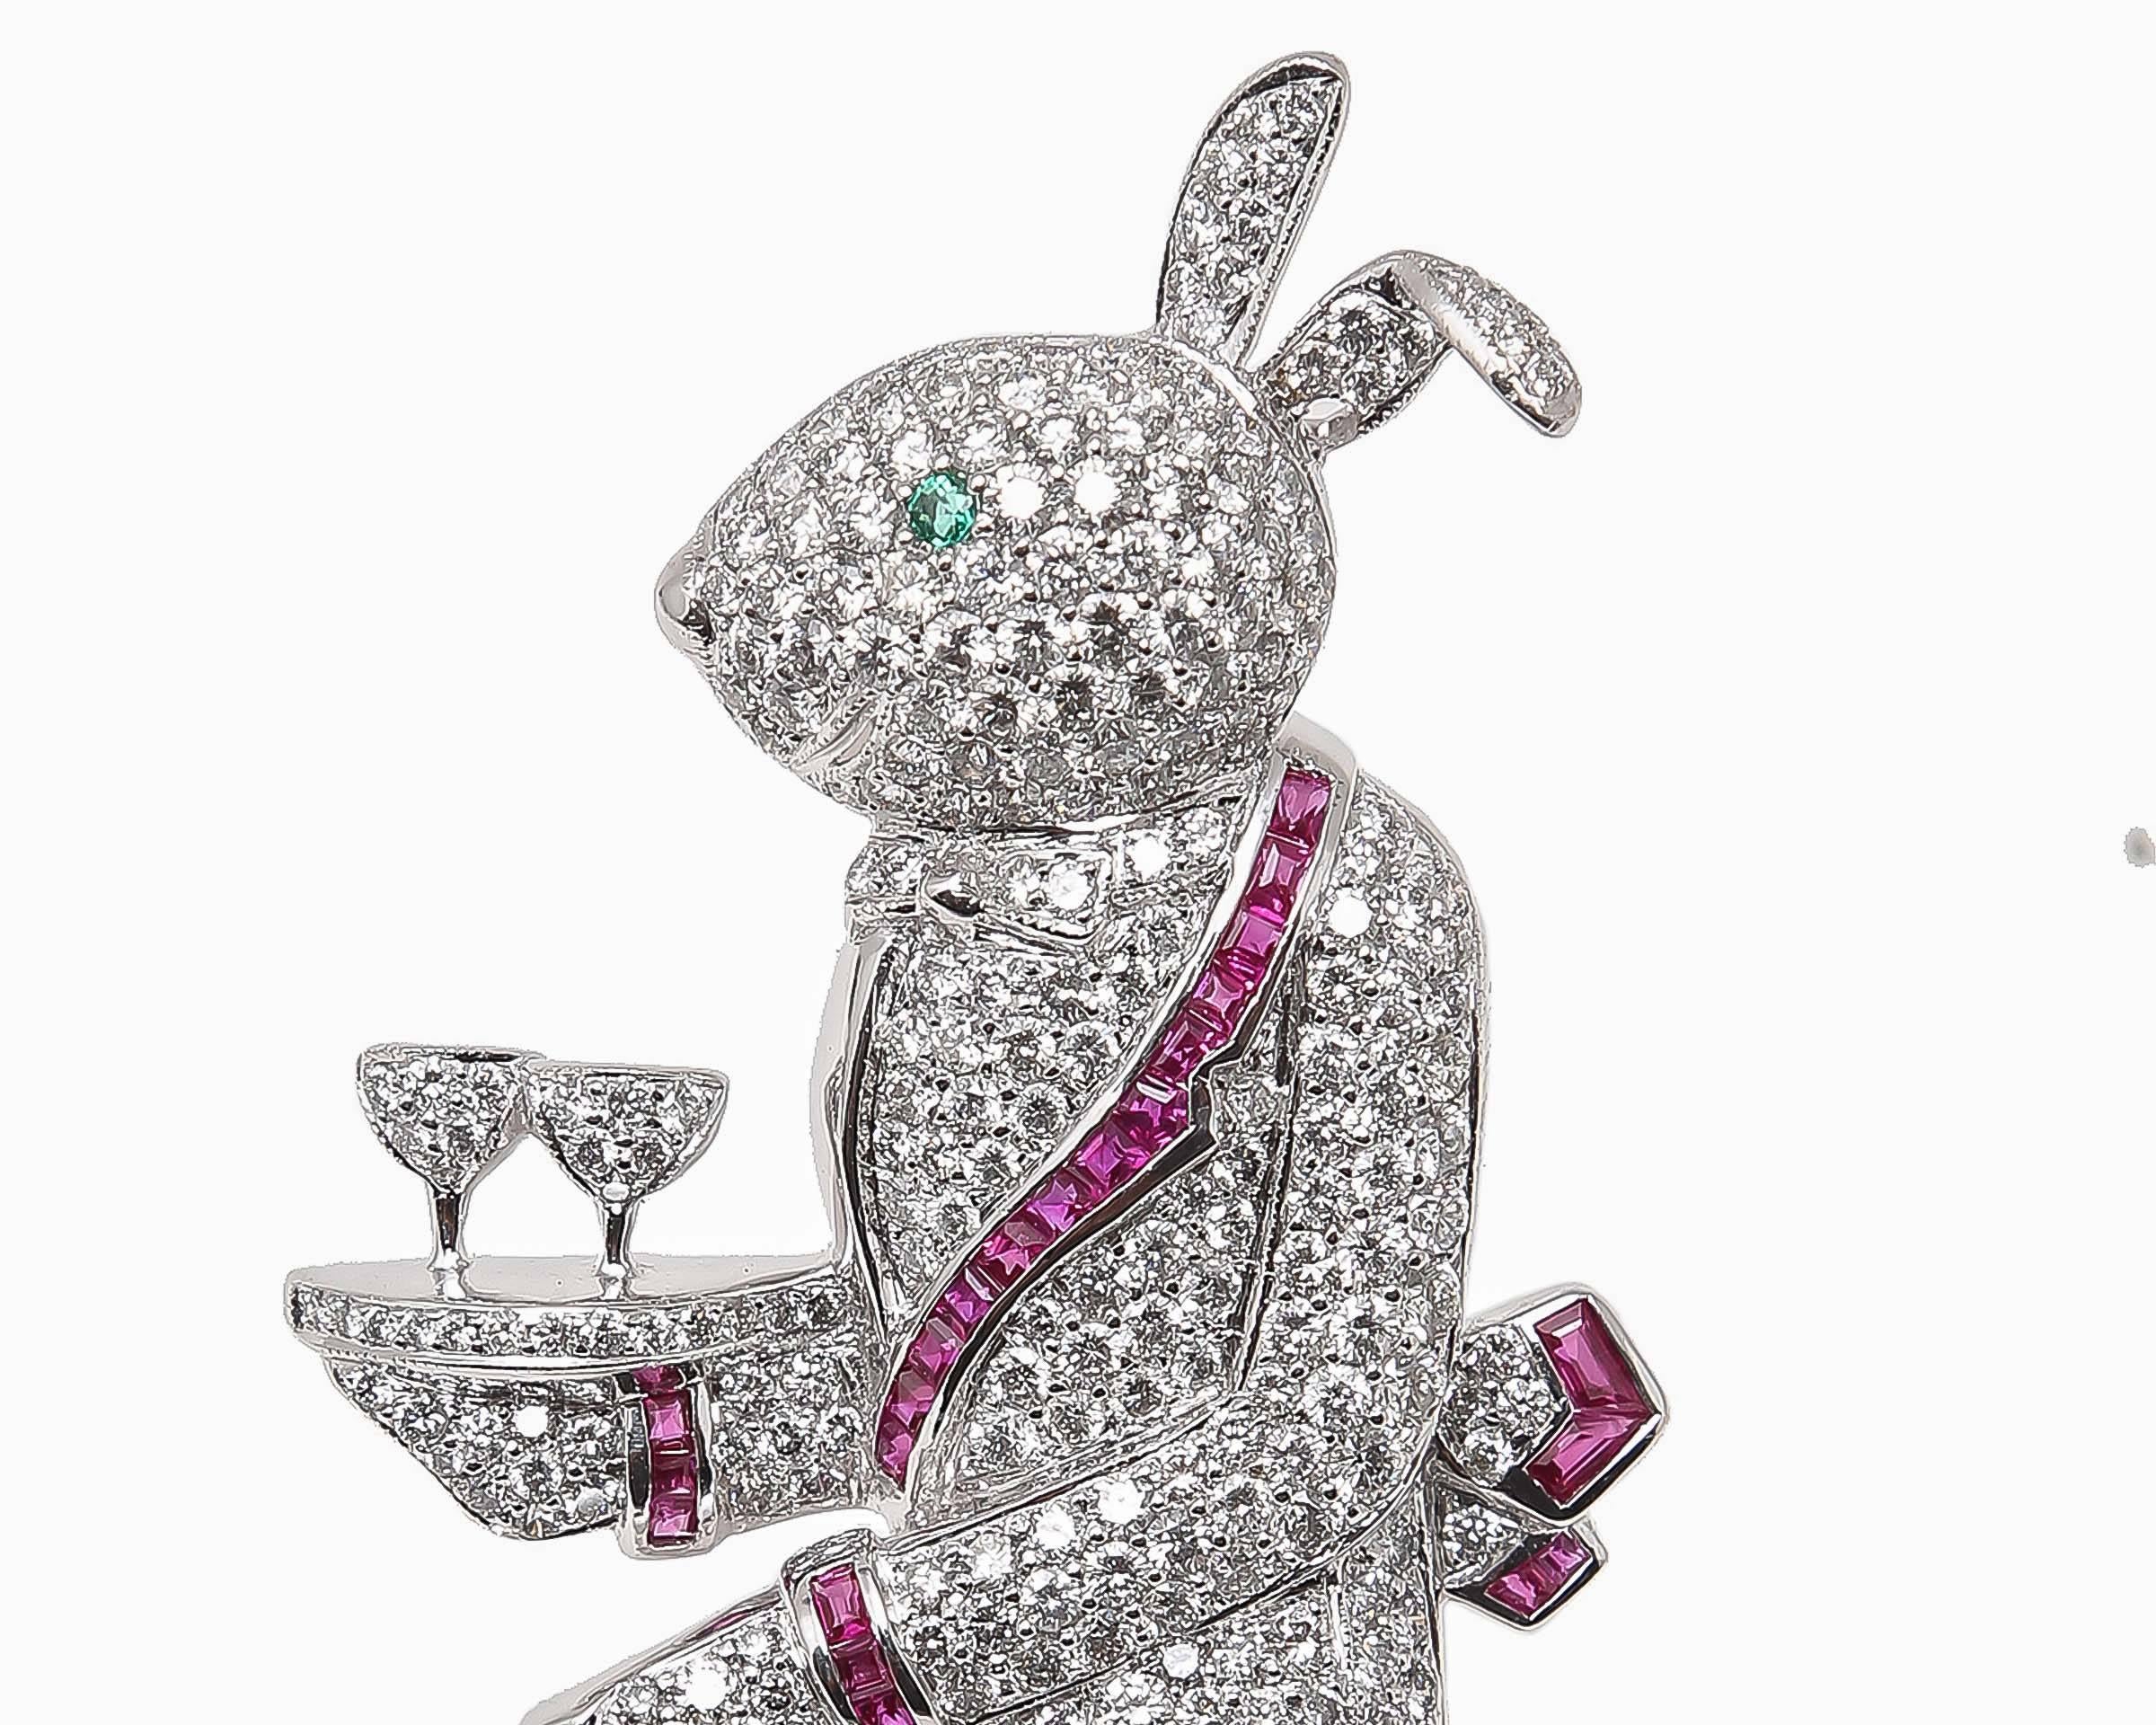 An incredible brooch depicting a rabbit waiter always at your service!  Meticulously crafted in 18 karat white gold embellished with 5.50 carats of brilliant cut diamonds having E color, VS1 clarity.  An impressive 3 carats of beautifully matched